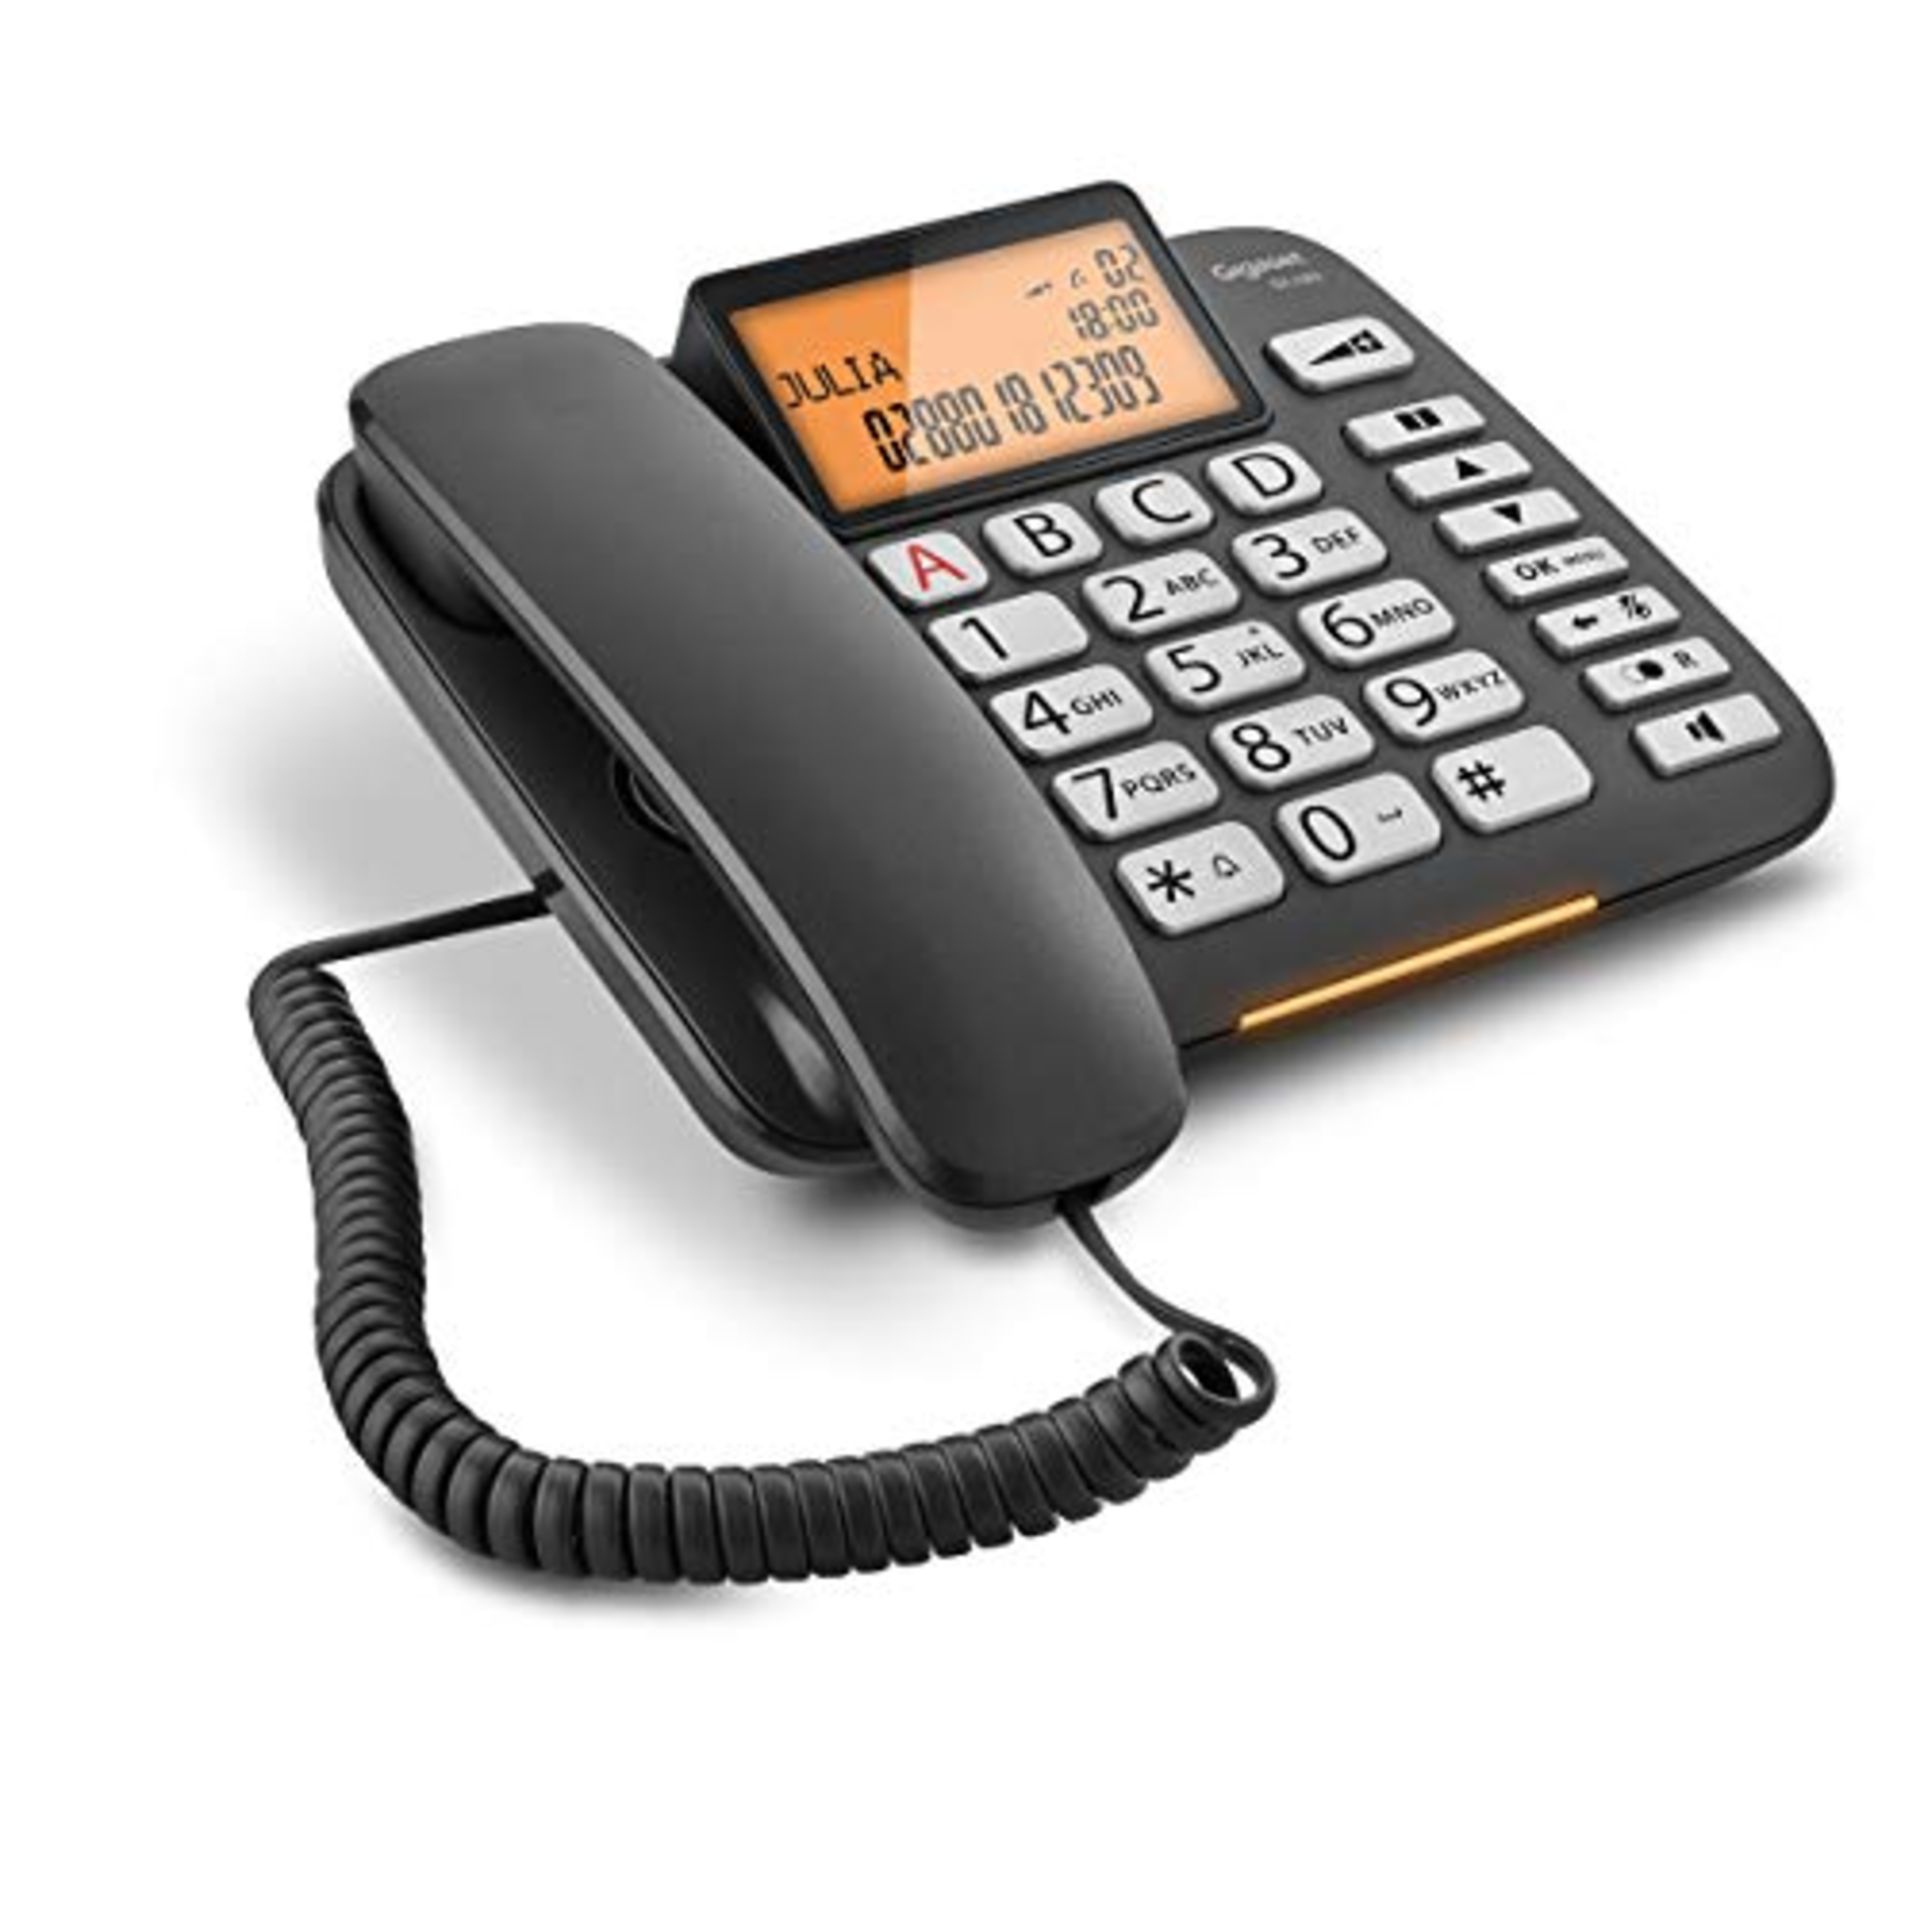 Gigaset DL580 Corded Telephone Black [French Version] - Image 4 of 6